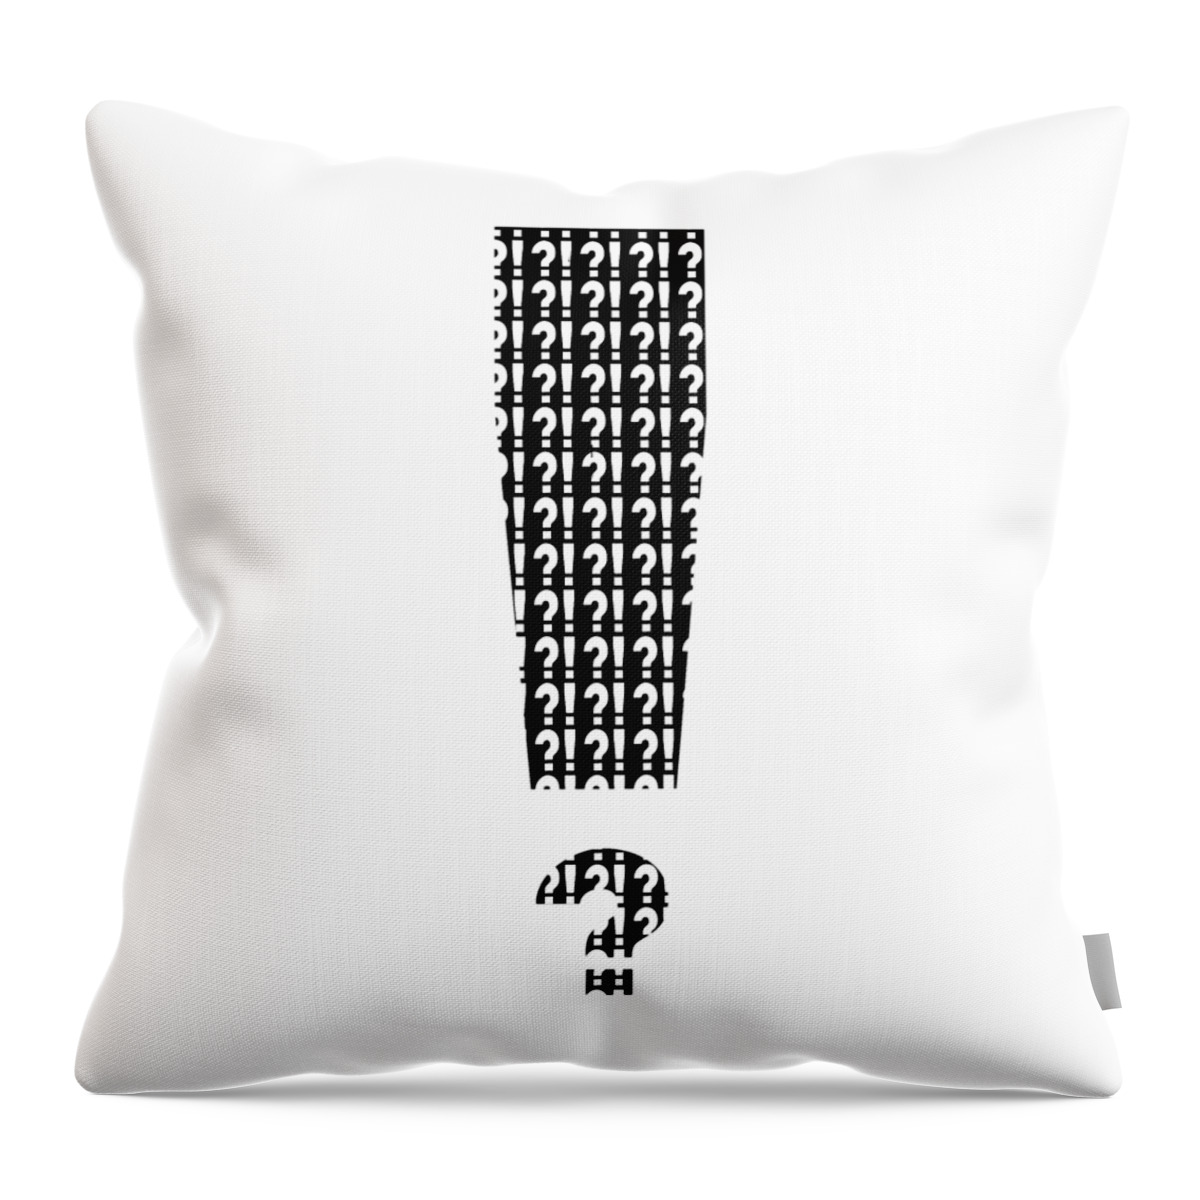 2d Throw Pillow featuring the photograph Interrobang 3 by Brian Wallace